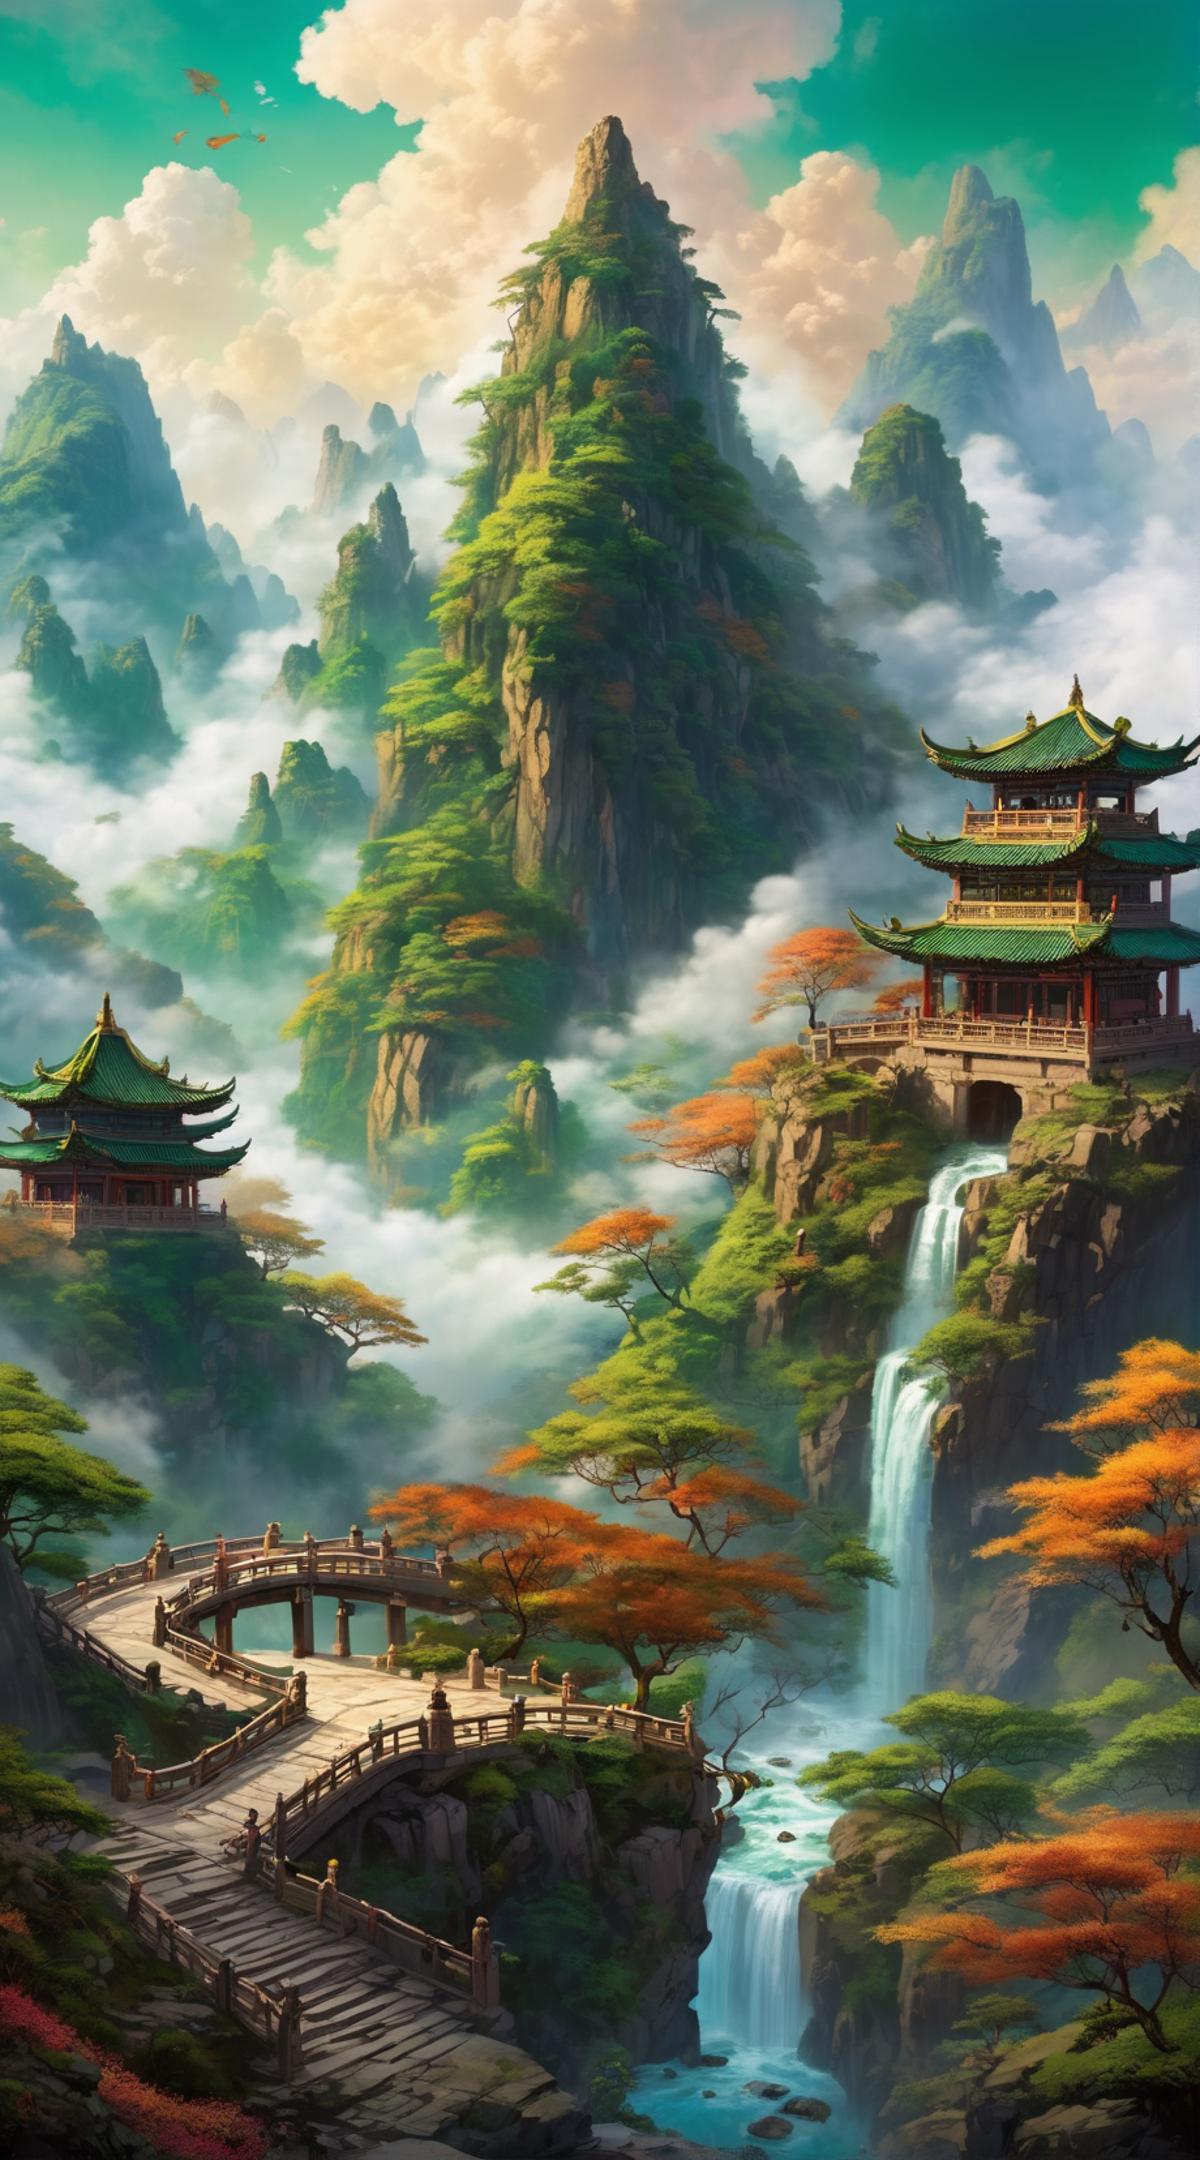 A colorful painting of a mountain with pagoda-style buildings, a waterfall, and a bridge.